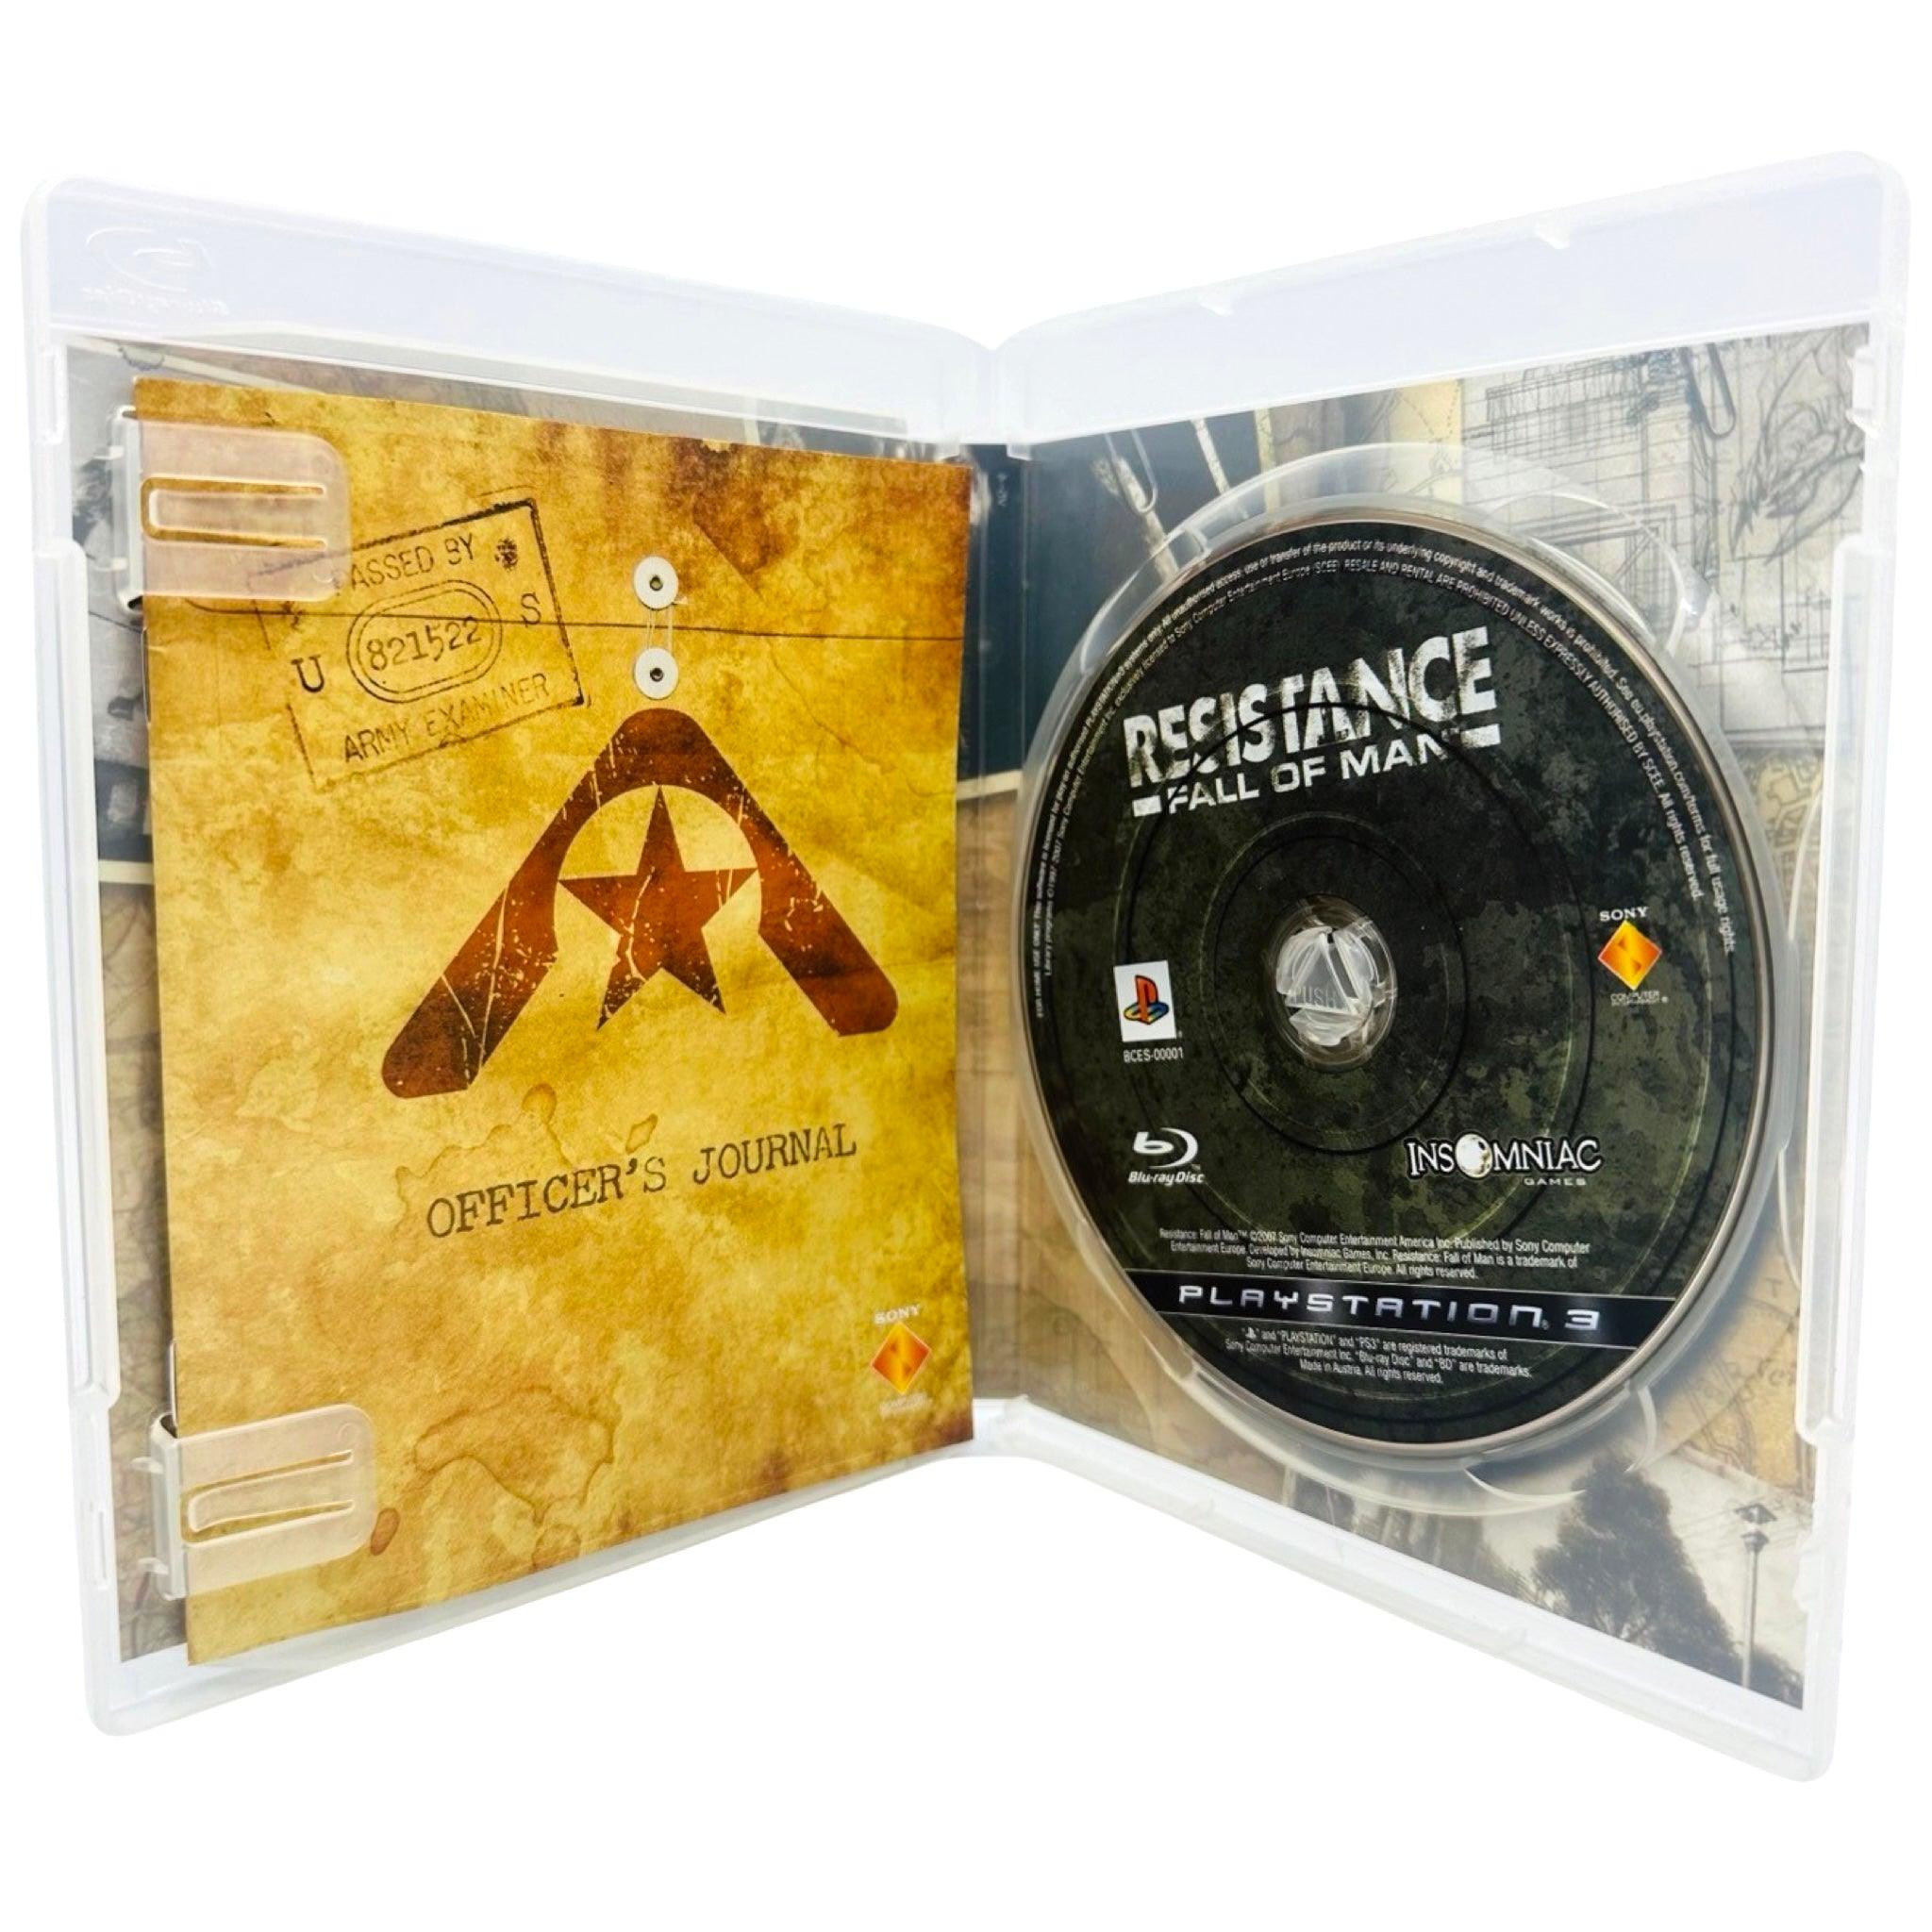 PS3: Resistance: Fall Of Man - RetroGaming.no